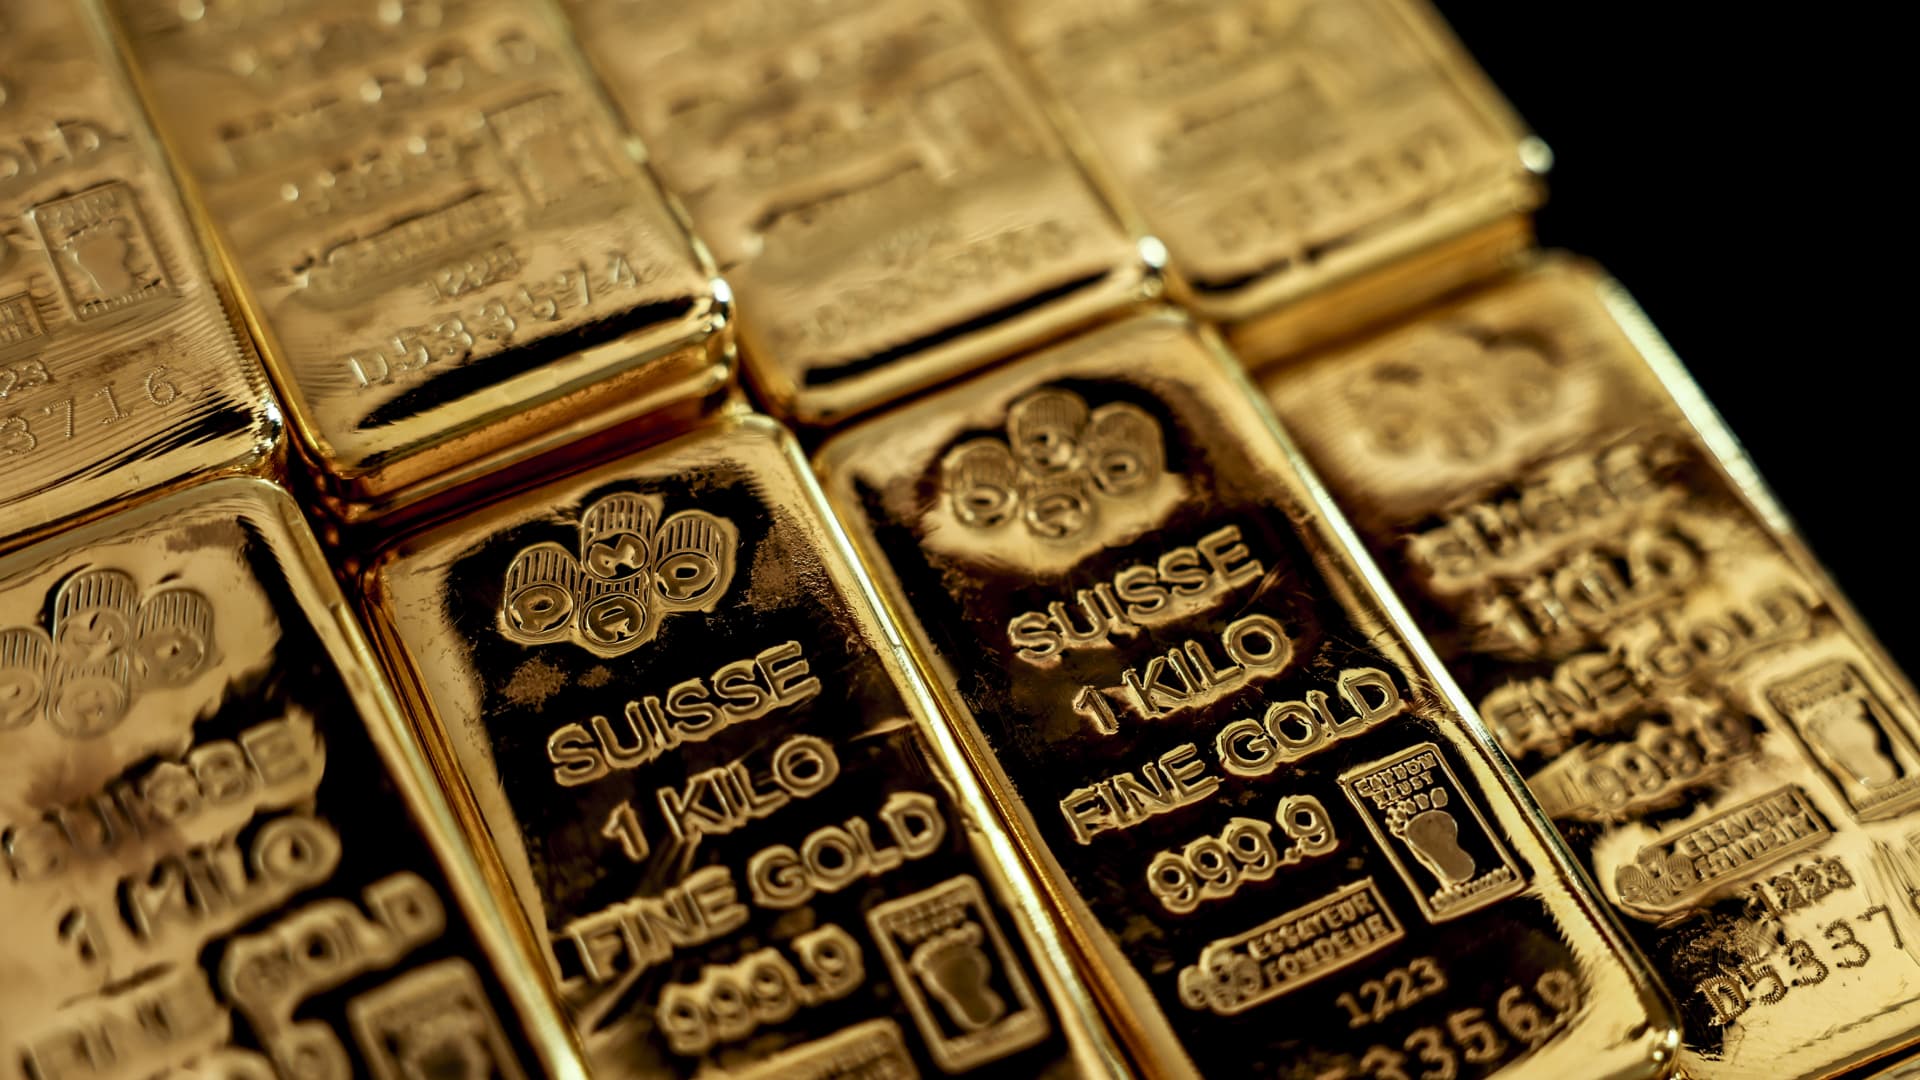 Gold futures hit a record above $2,460 on hopes the Fed will cut rates soon